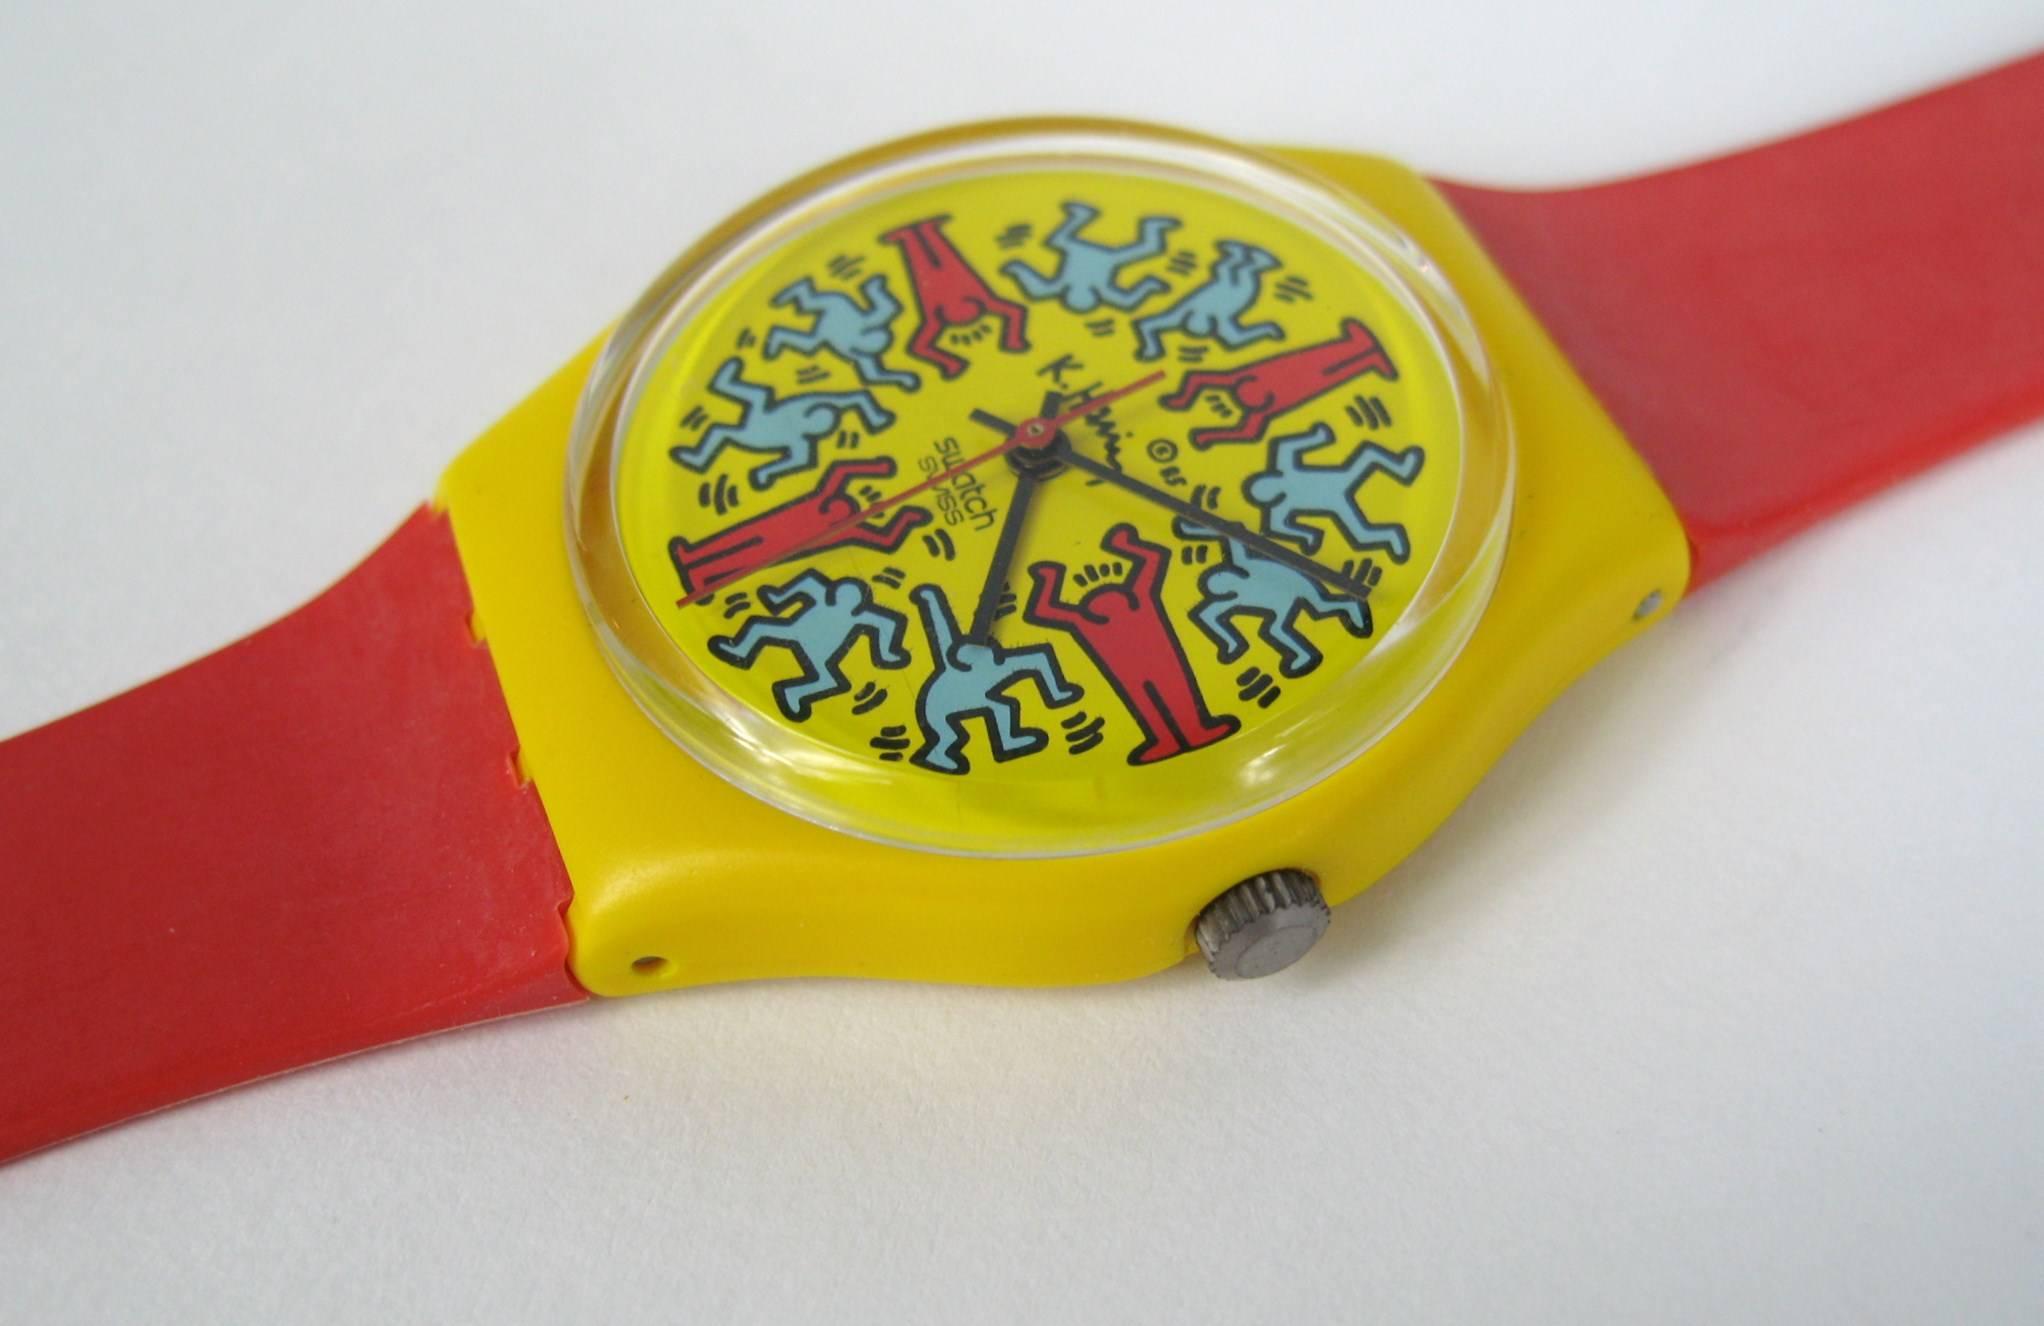 This is a 1985 Keith Haring Swatch Watch, Modele Avec Personnages GZ100. Limited to 9,999 Pieces. In working order. It looks like it was never worn.  We have been selling this collection on 1st dibs since 2013. 